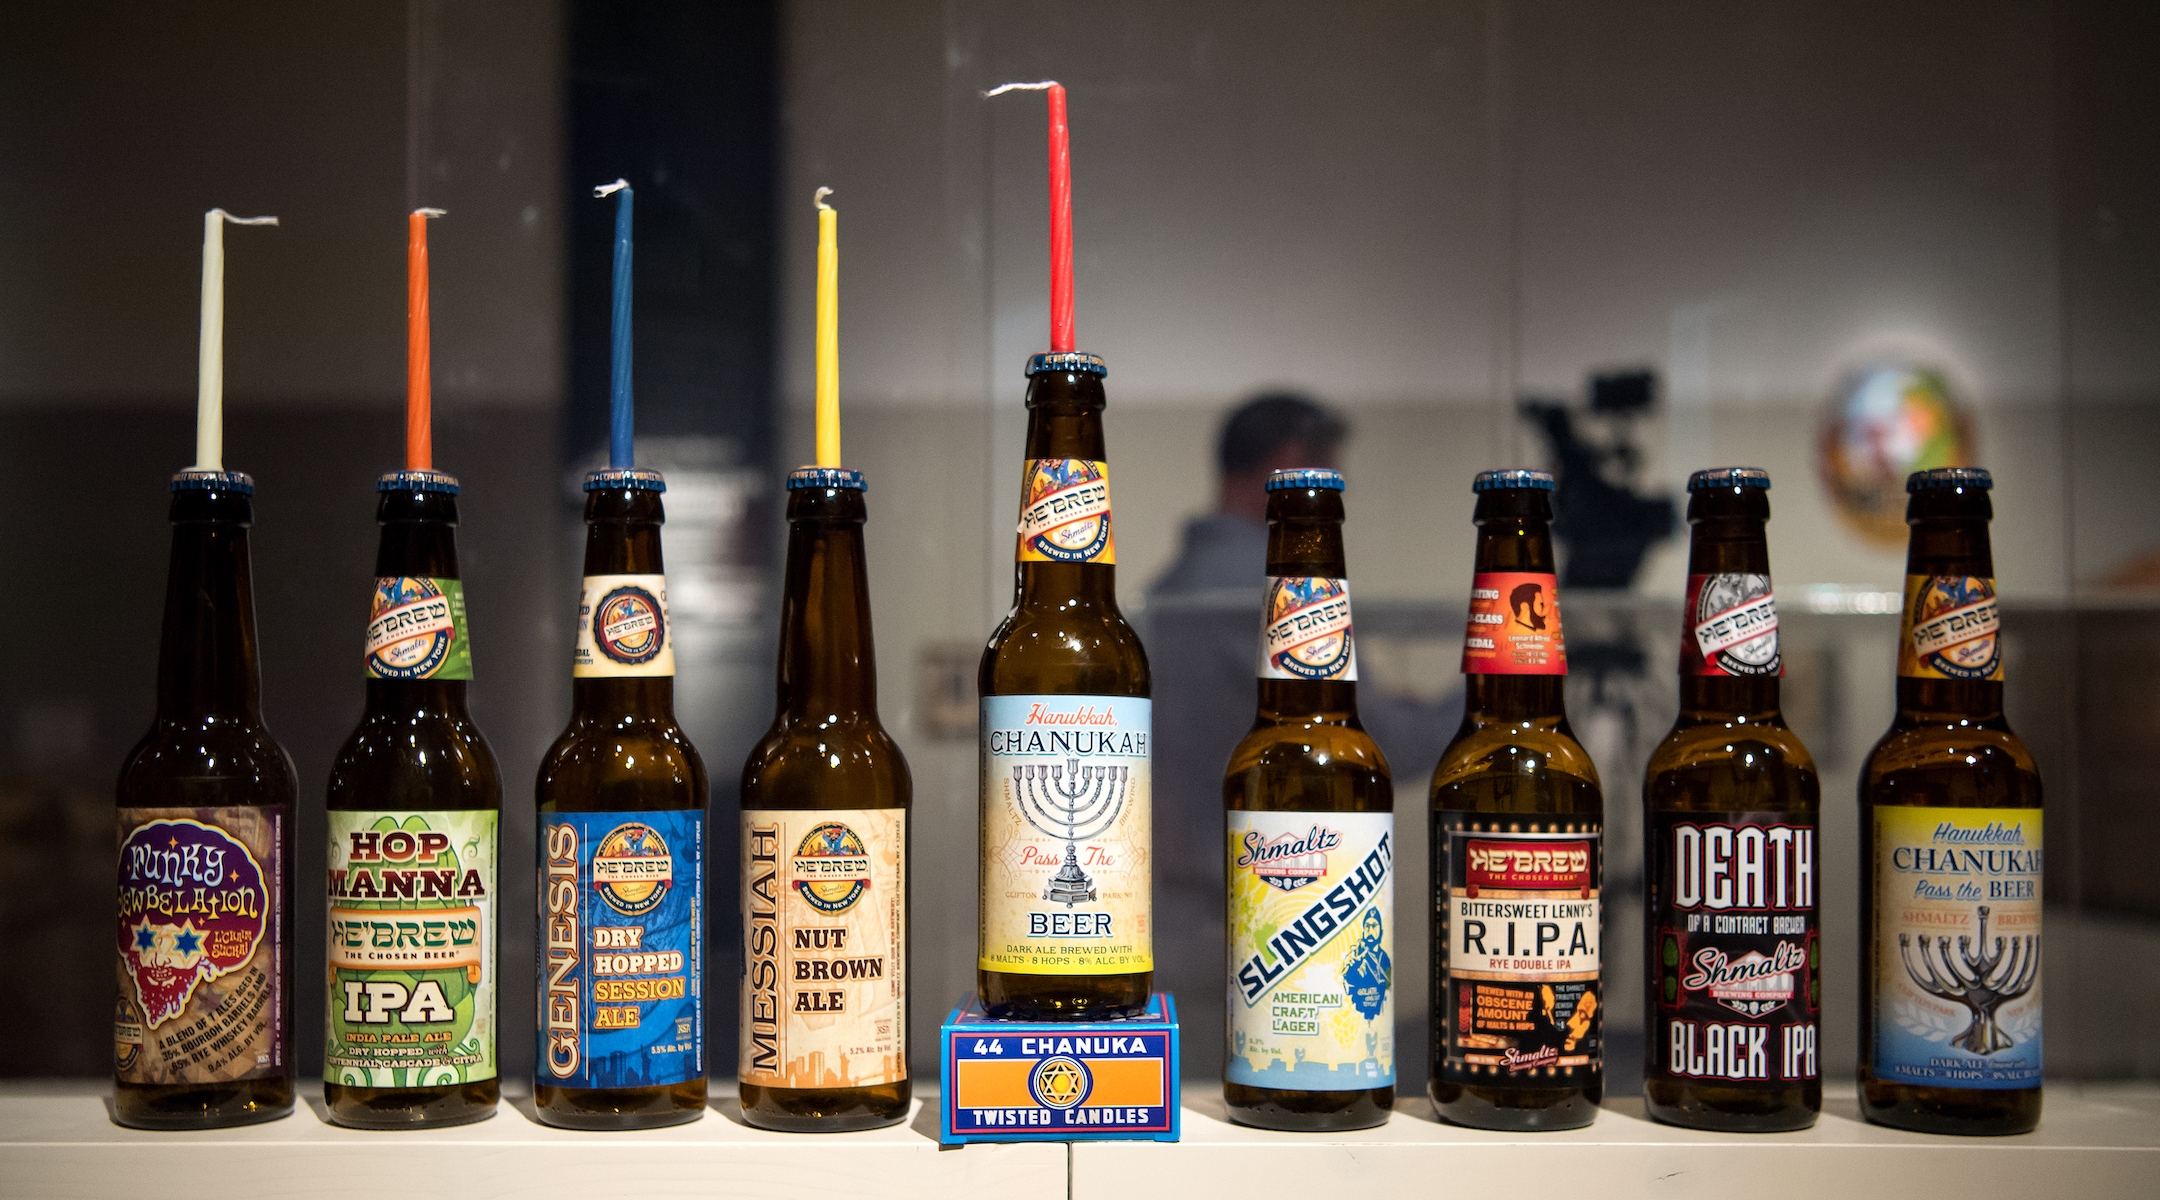 Various beer bottles by Shmaltz Brewery on display in an exhibition on “Jewish brewing stories” at the Jewish Museum in Munich, Germany, April 11, 2016. (Sven Hoppe/picture alliance via Getty Images)